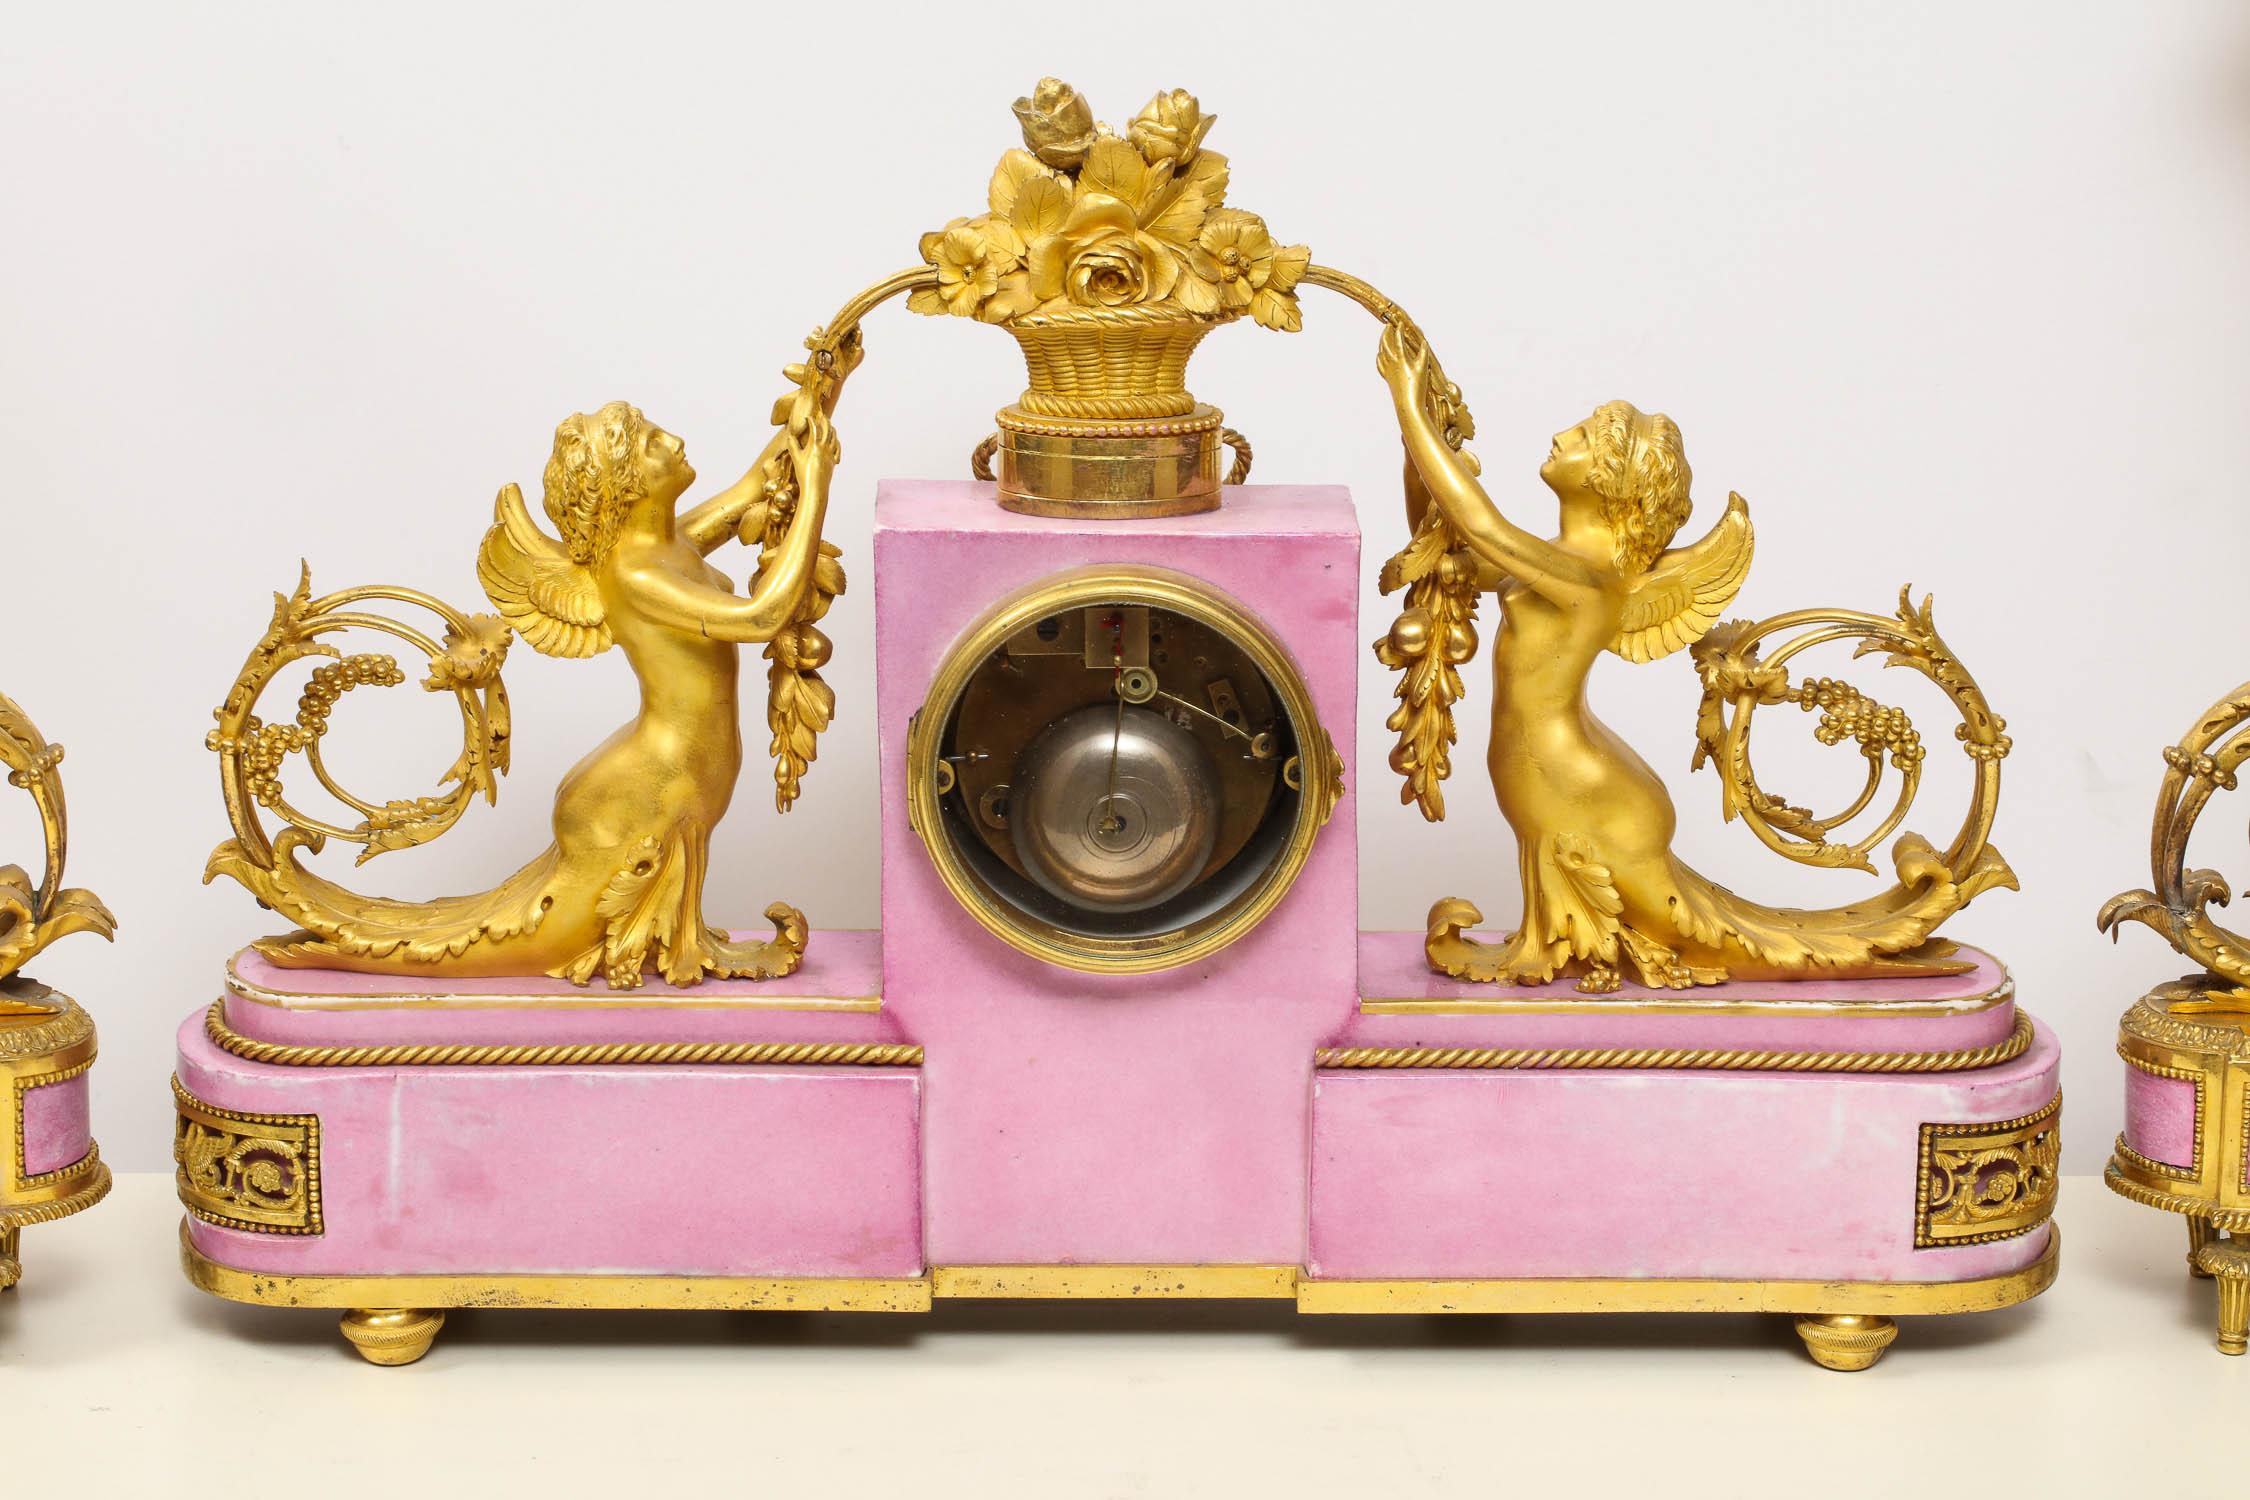 Exquisite French Ormolu and Pink Porcelain Clock Set after Francois Remond 5